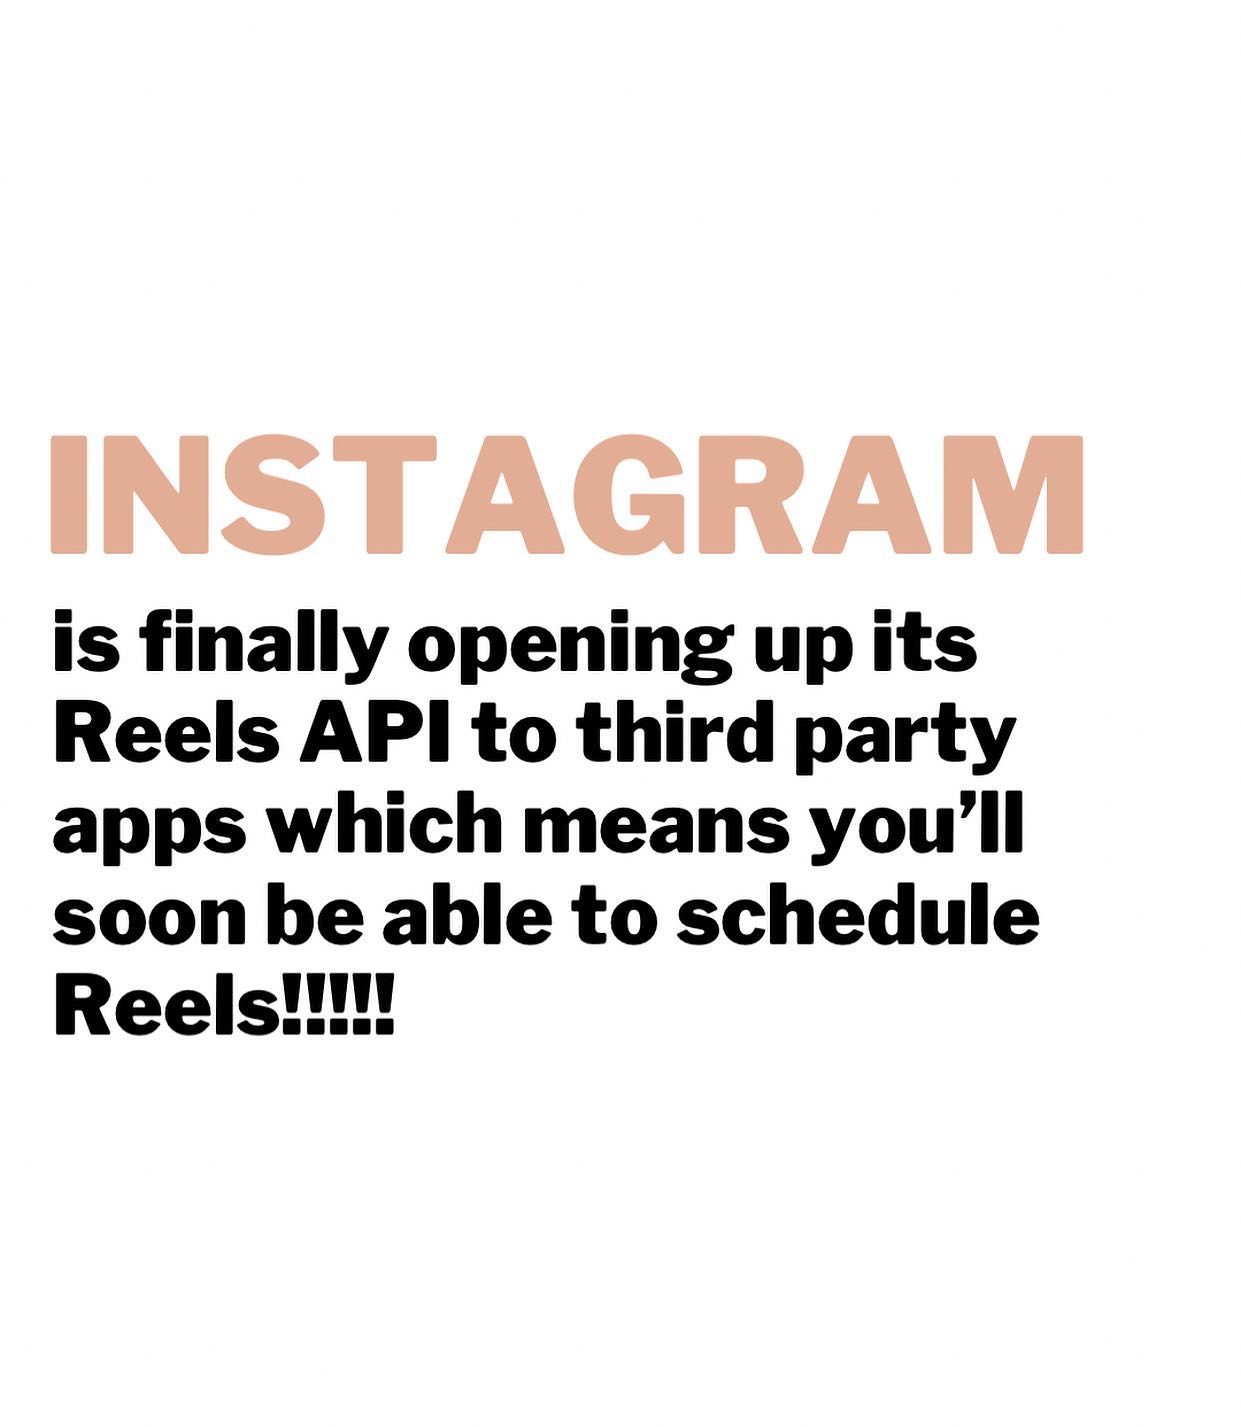 Literally jumping up and down with joy right now!!!! 

We’ve been waiting for this for SO long. 

PS.  For those of you still thinking Reels is a ‘phase’ this is further proof they are here for the long haul! 
.
.
.
.
(Information about this update sourced by legend @mari_smith )
#instagramupdate #instagramupdates #newinstagram #instagramnews #socialmediaupdates #igtips #reelstips #reelstrend